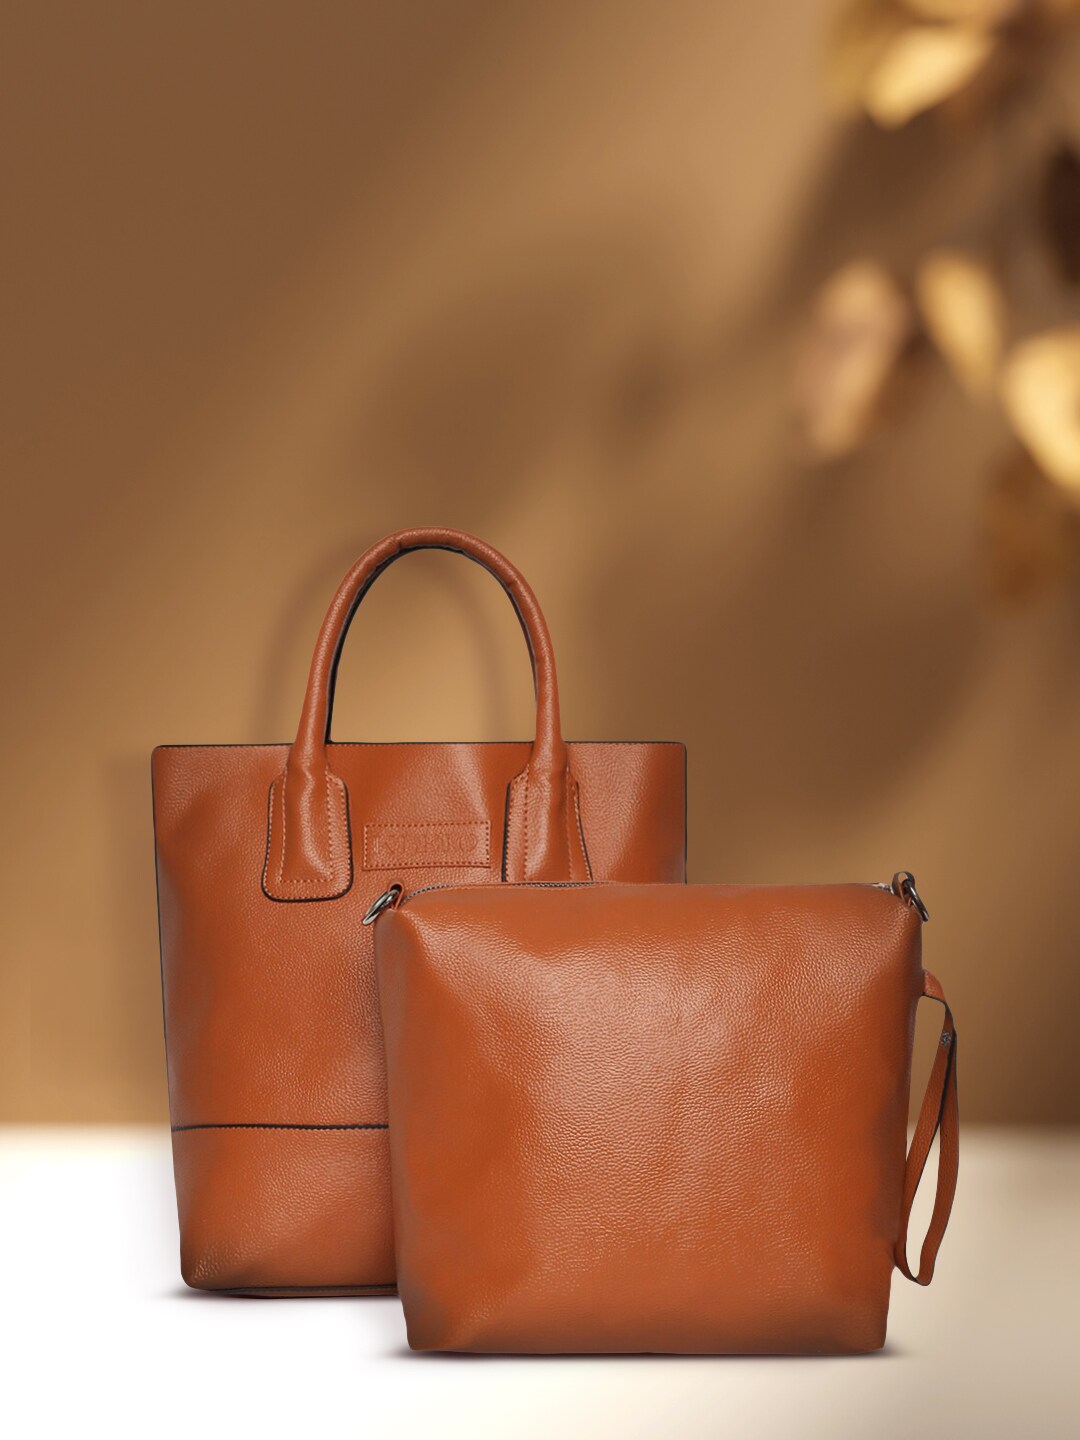 KLEIO Tan Brown Solid Tote Bag With Pouch Price in India